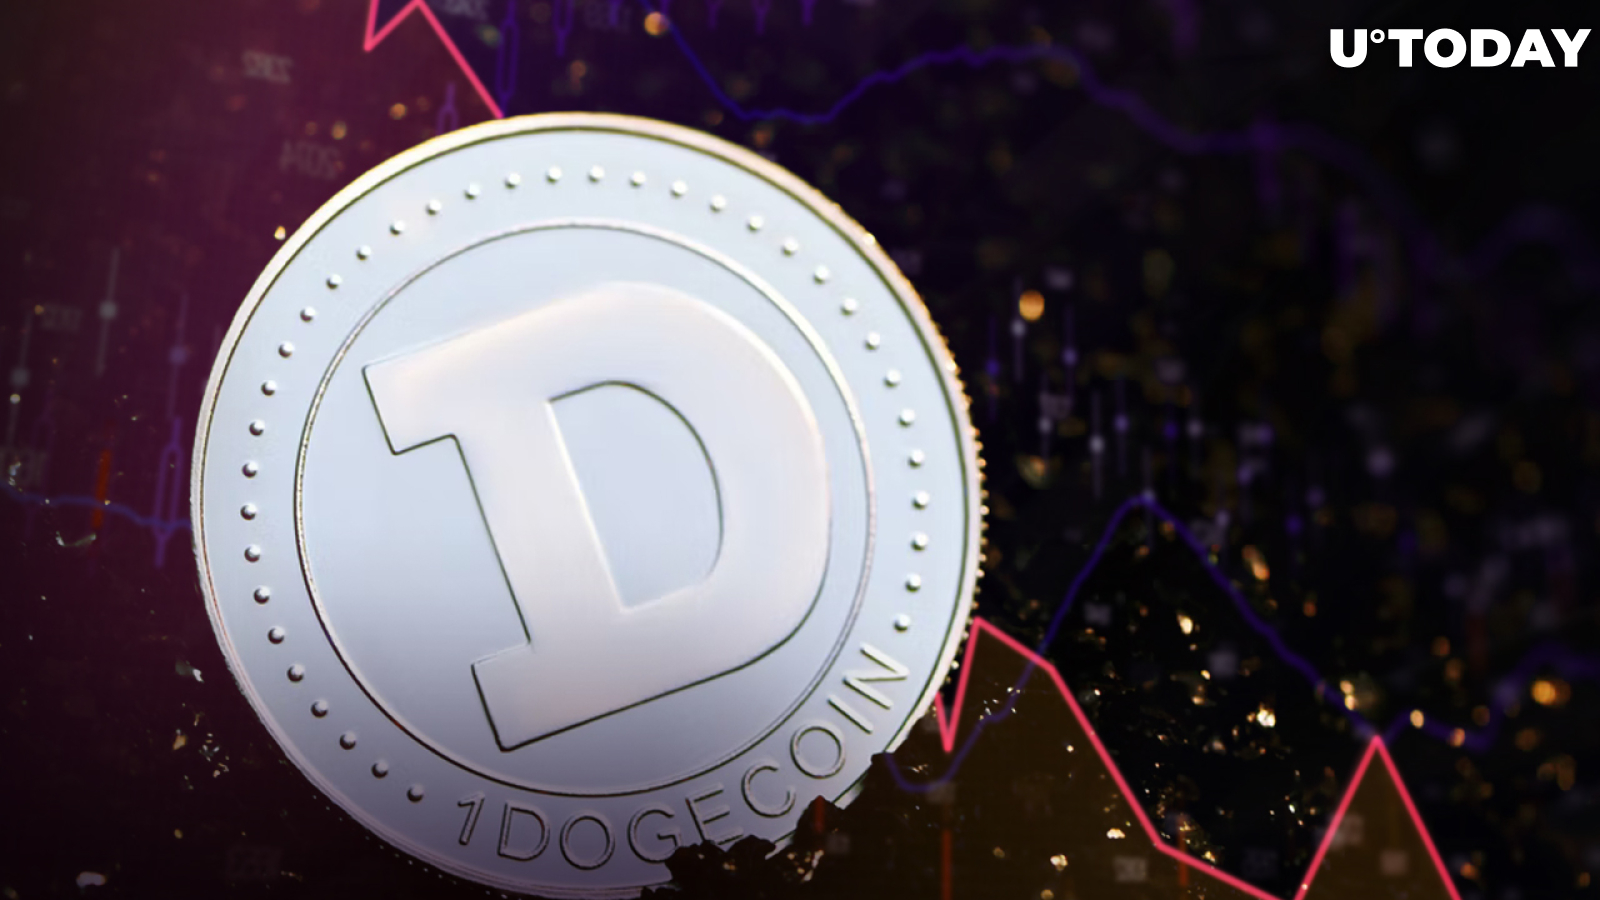 DOGE Co-founder Explains Why Interest in Dogecoin Has Plunged Since 2021 ATH